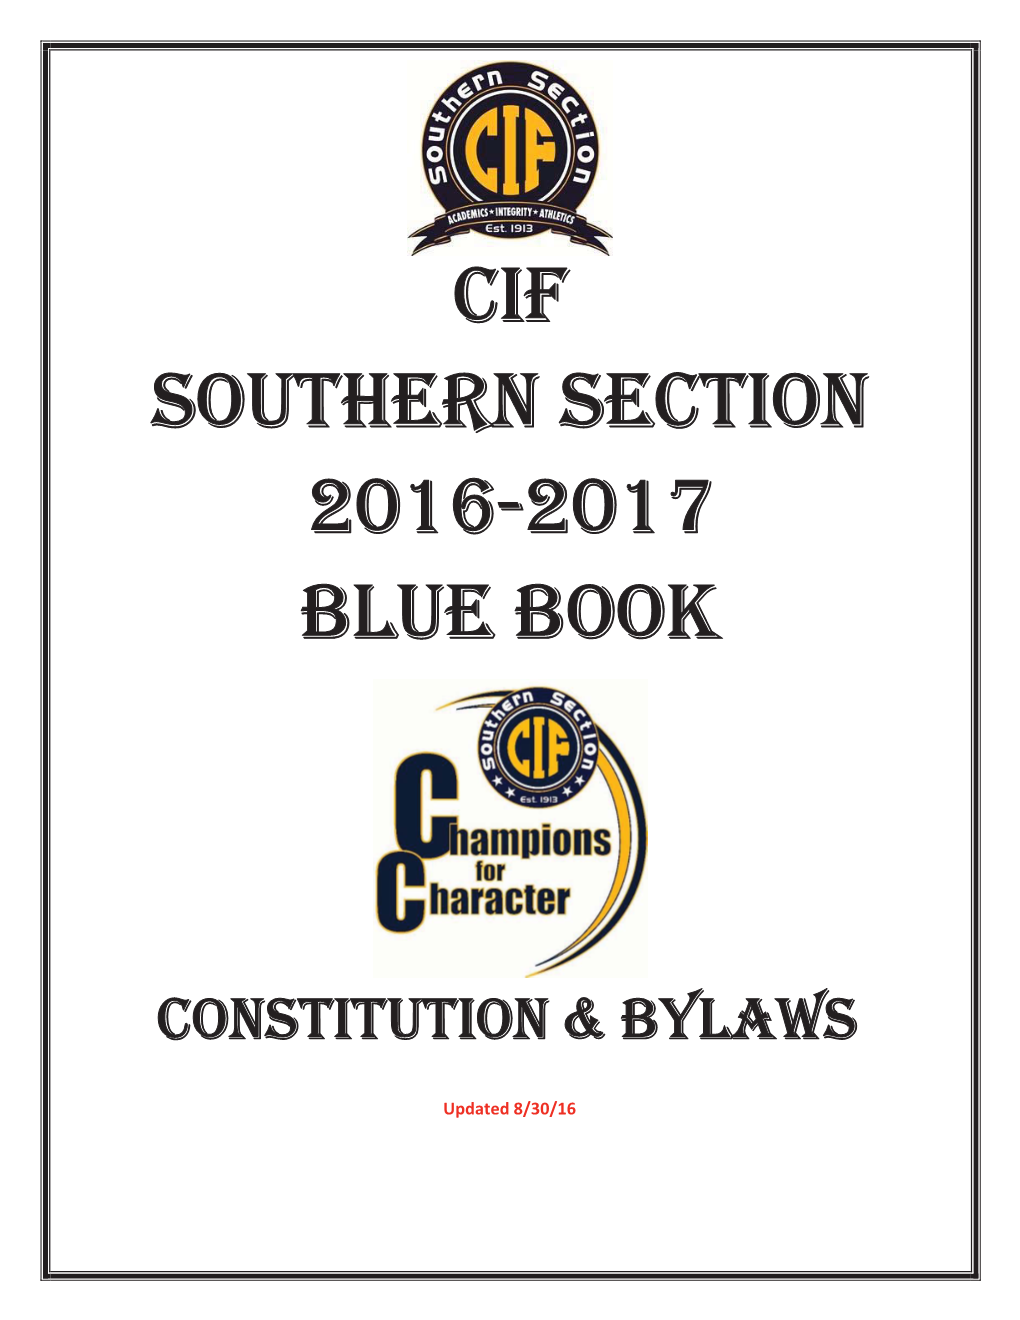 Cif Southern Section 2016-2017 Blue Book